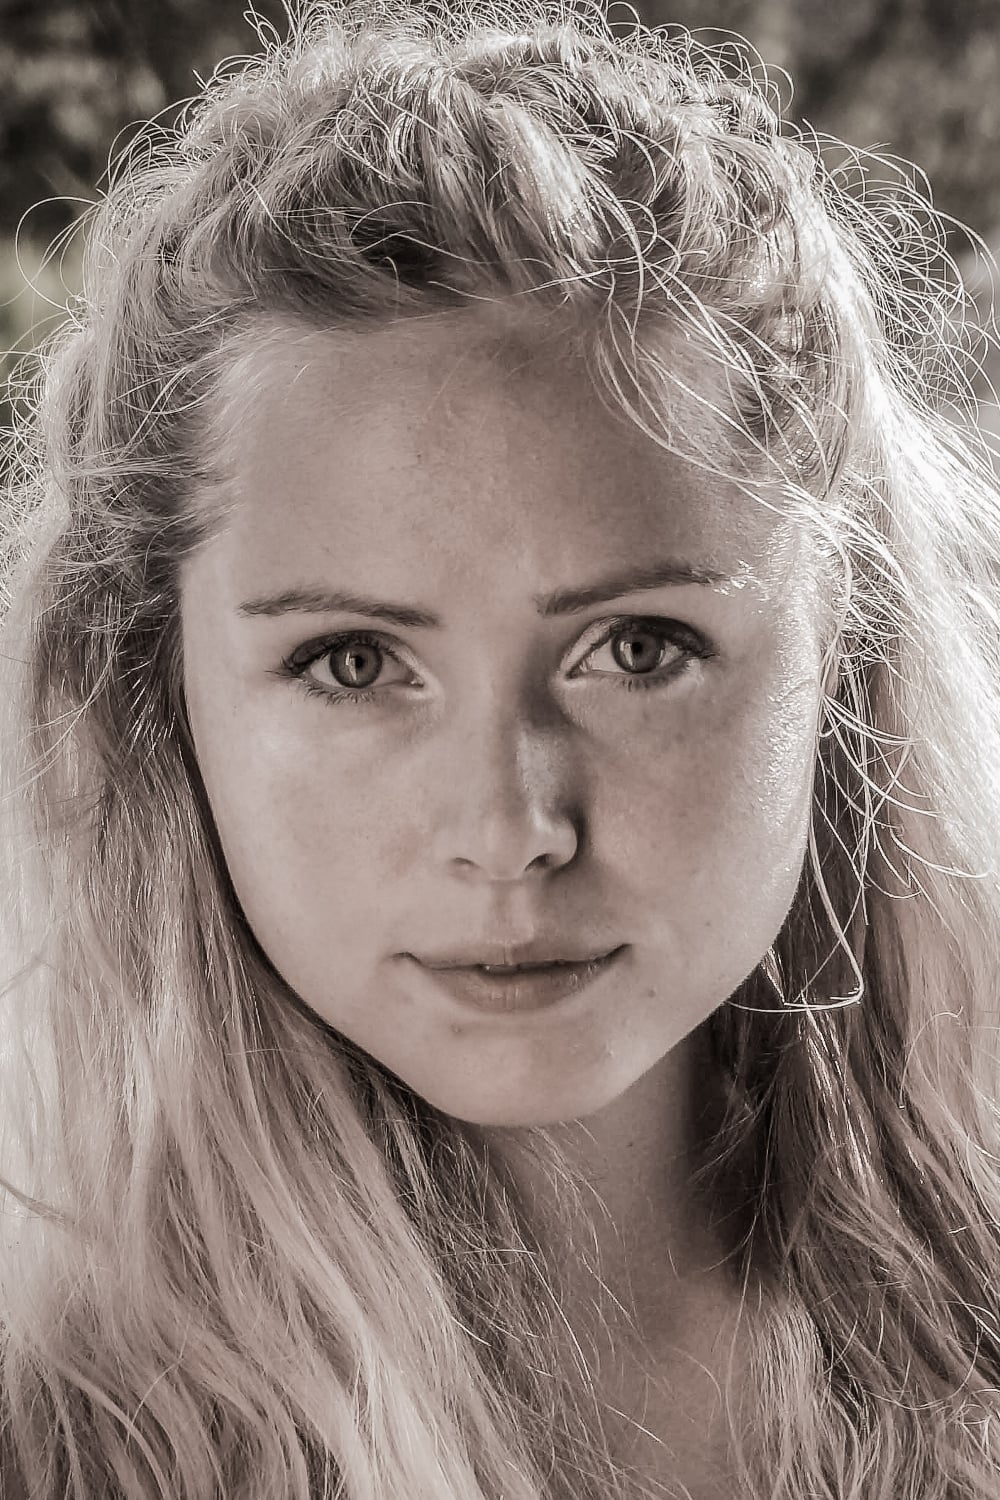 Discover the real story, facts, and details of ingvild deila. 